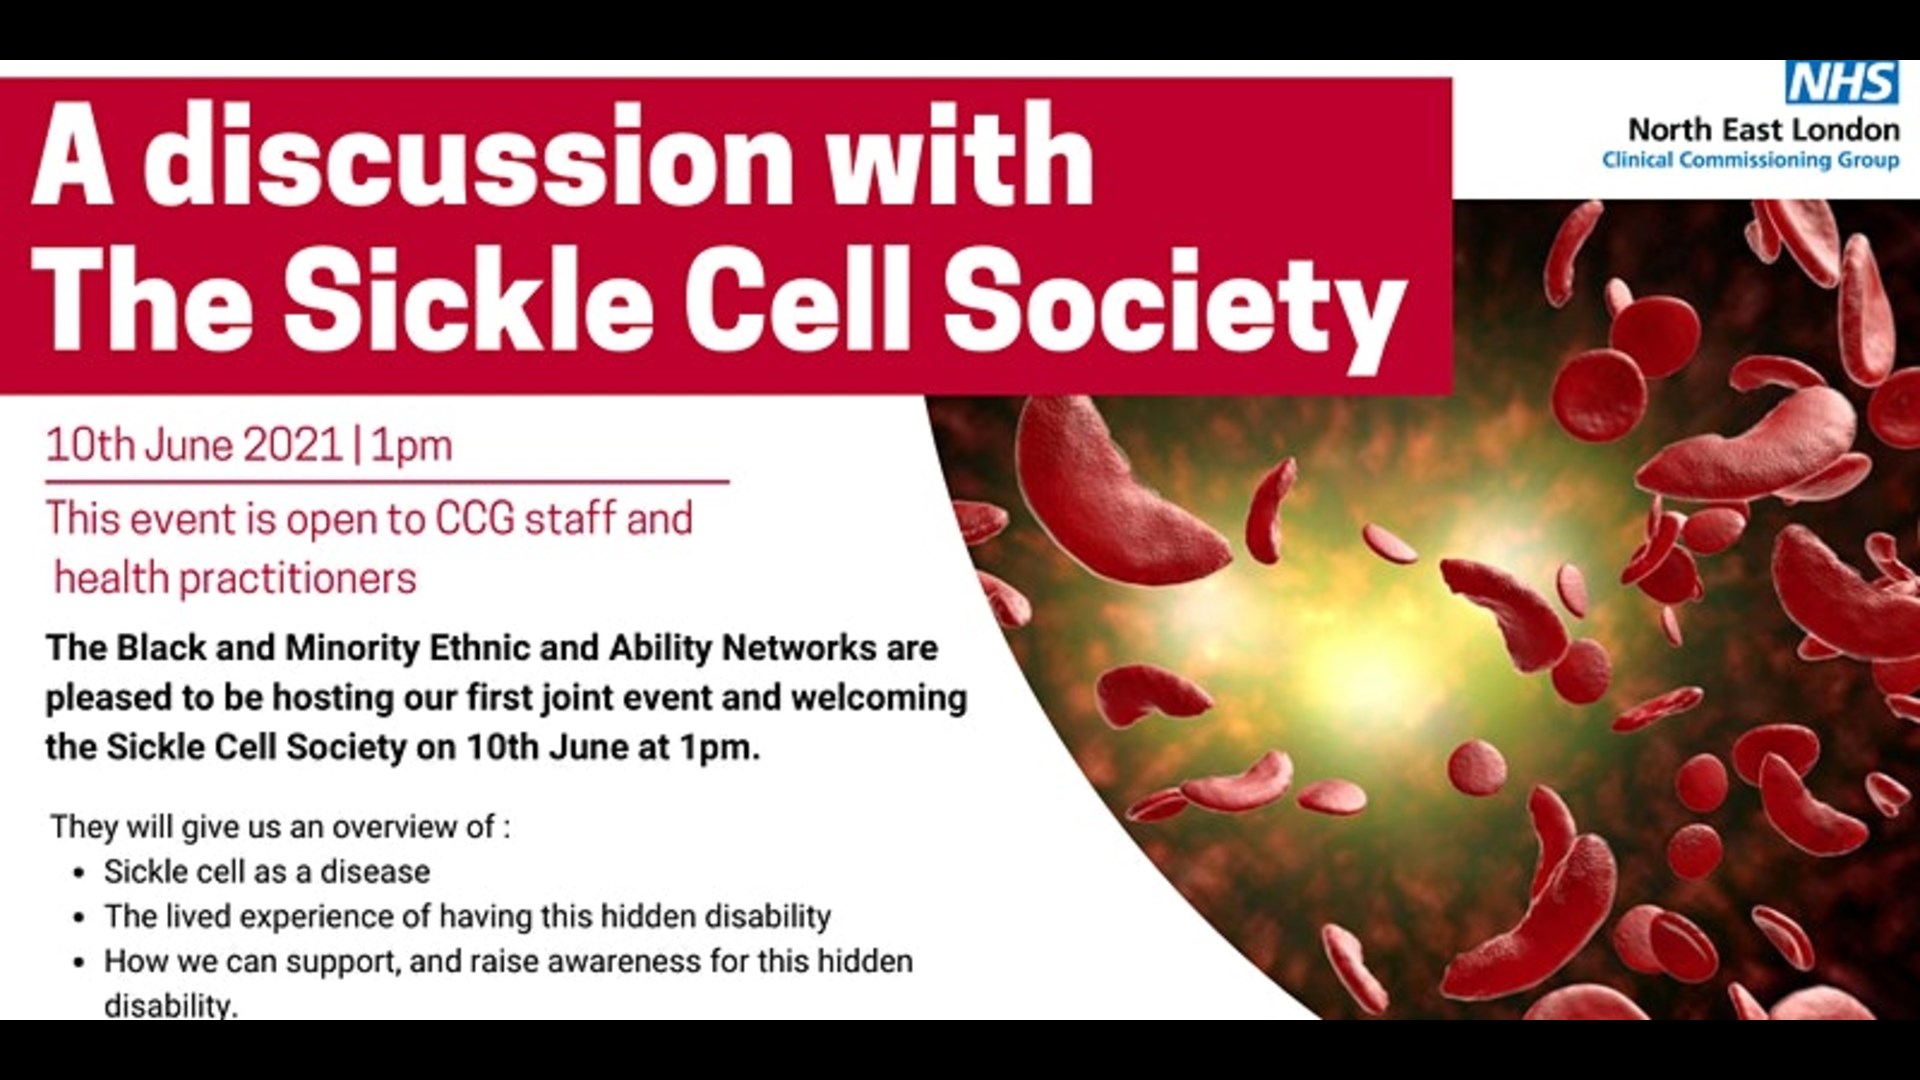 Sickle Cell Awareness Day Join a discussion with The Sickle Cell